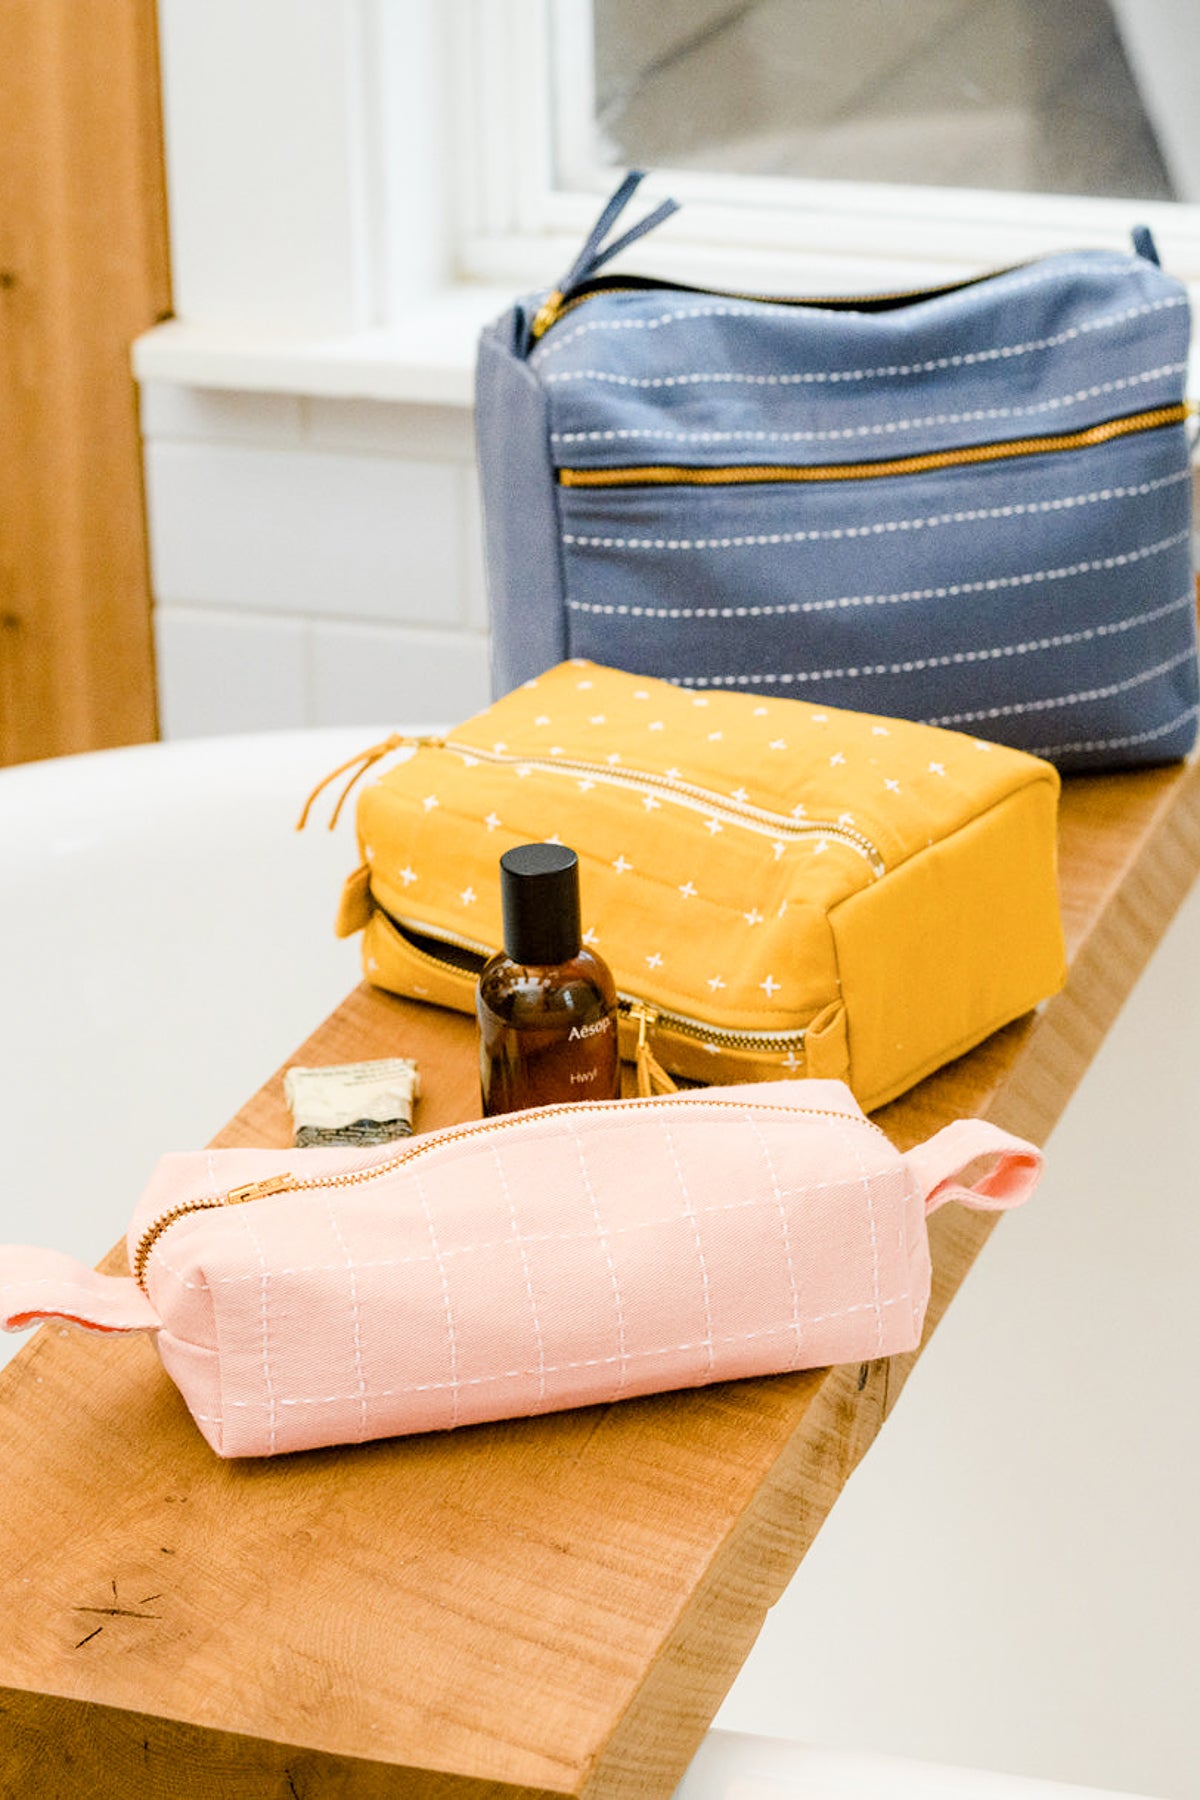 Anchal Project Slim Toiletry Bag